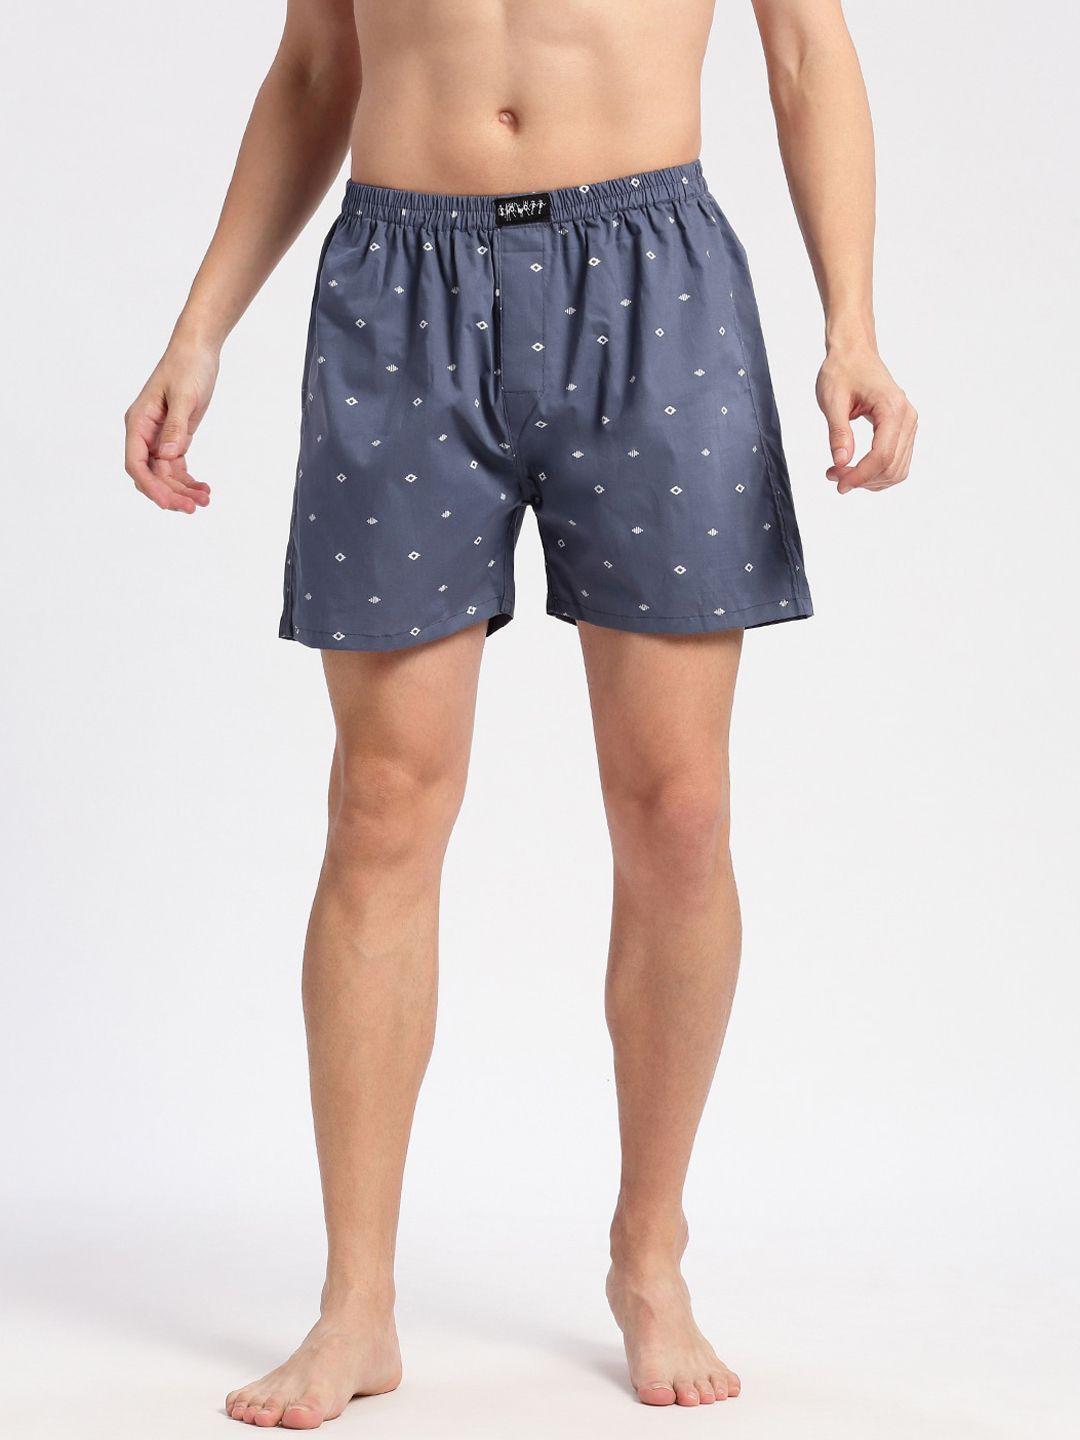 showoff-geometric-printed-cotton-boxers-am-141-12